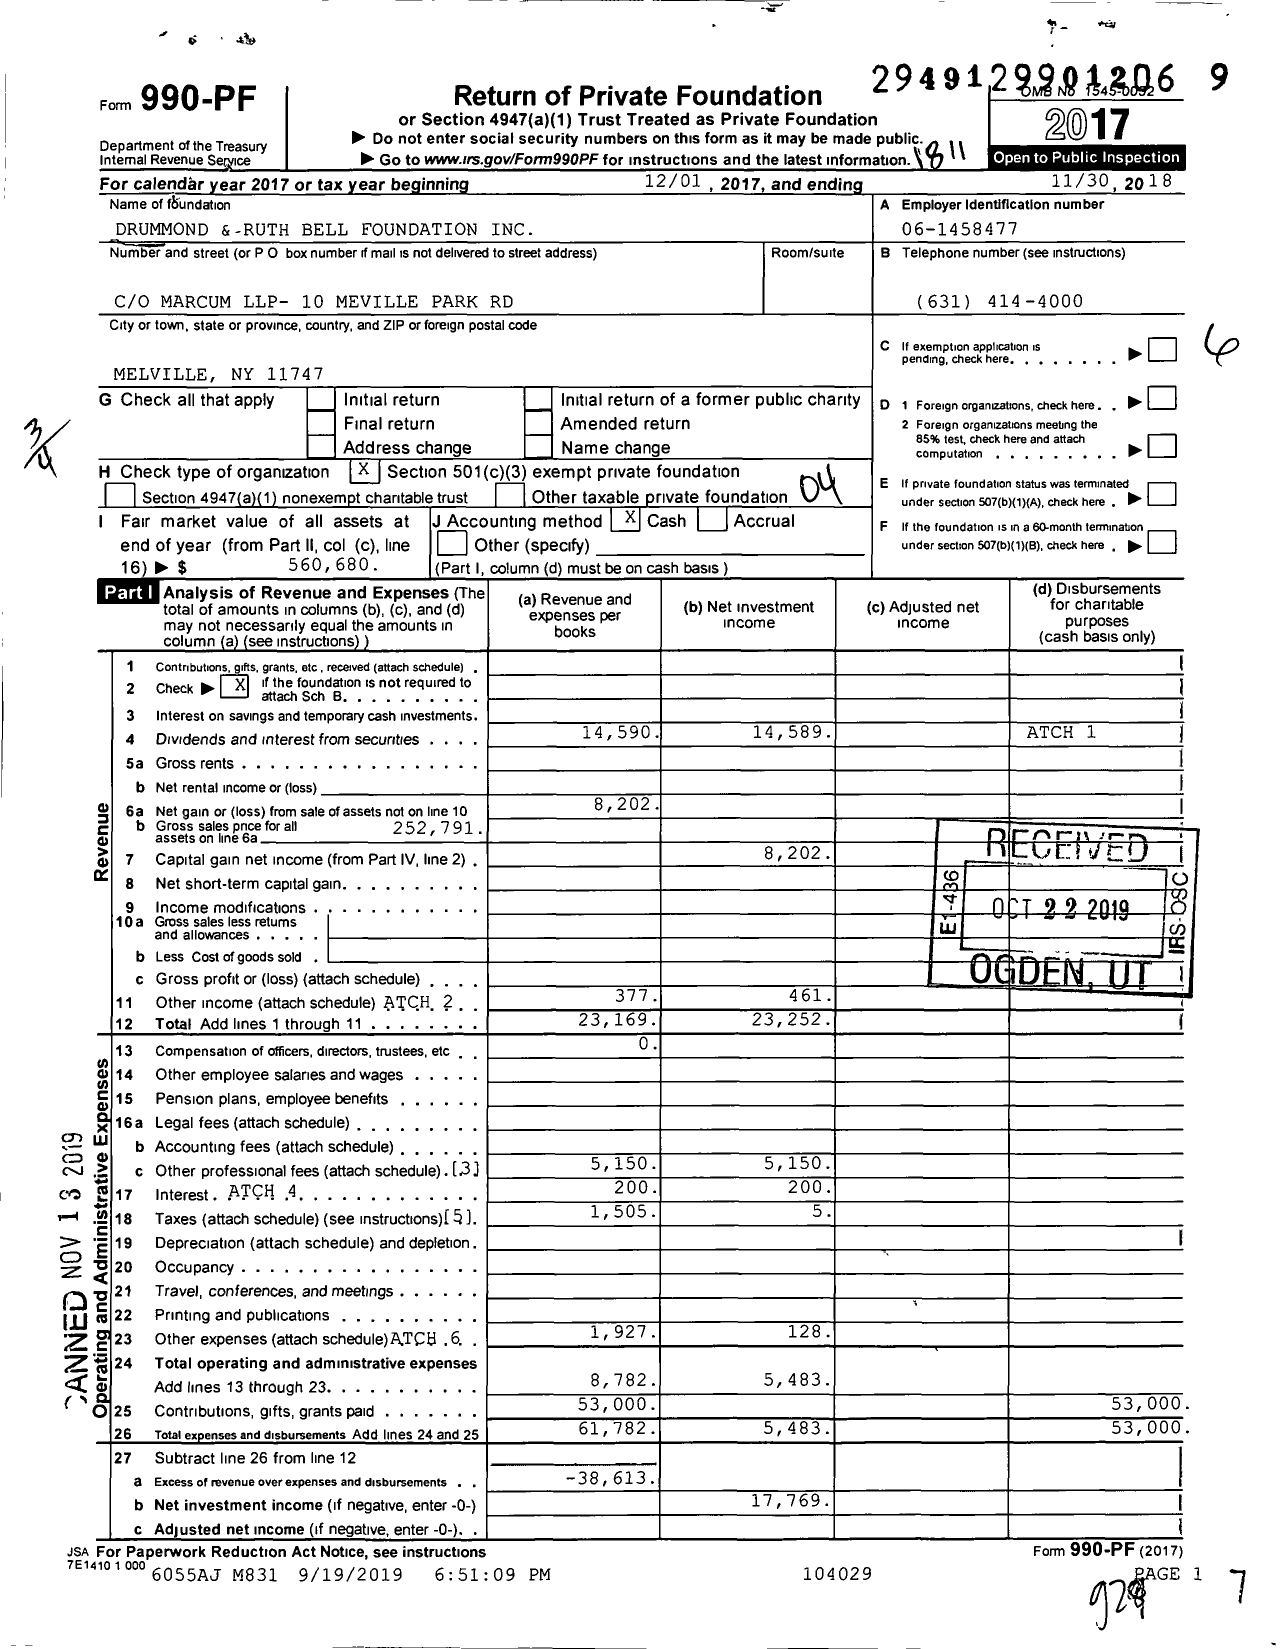 Image of first page of 2017 Form 990PF for Drummond and Ruth Bell Foundation